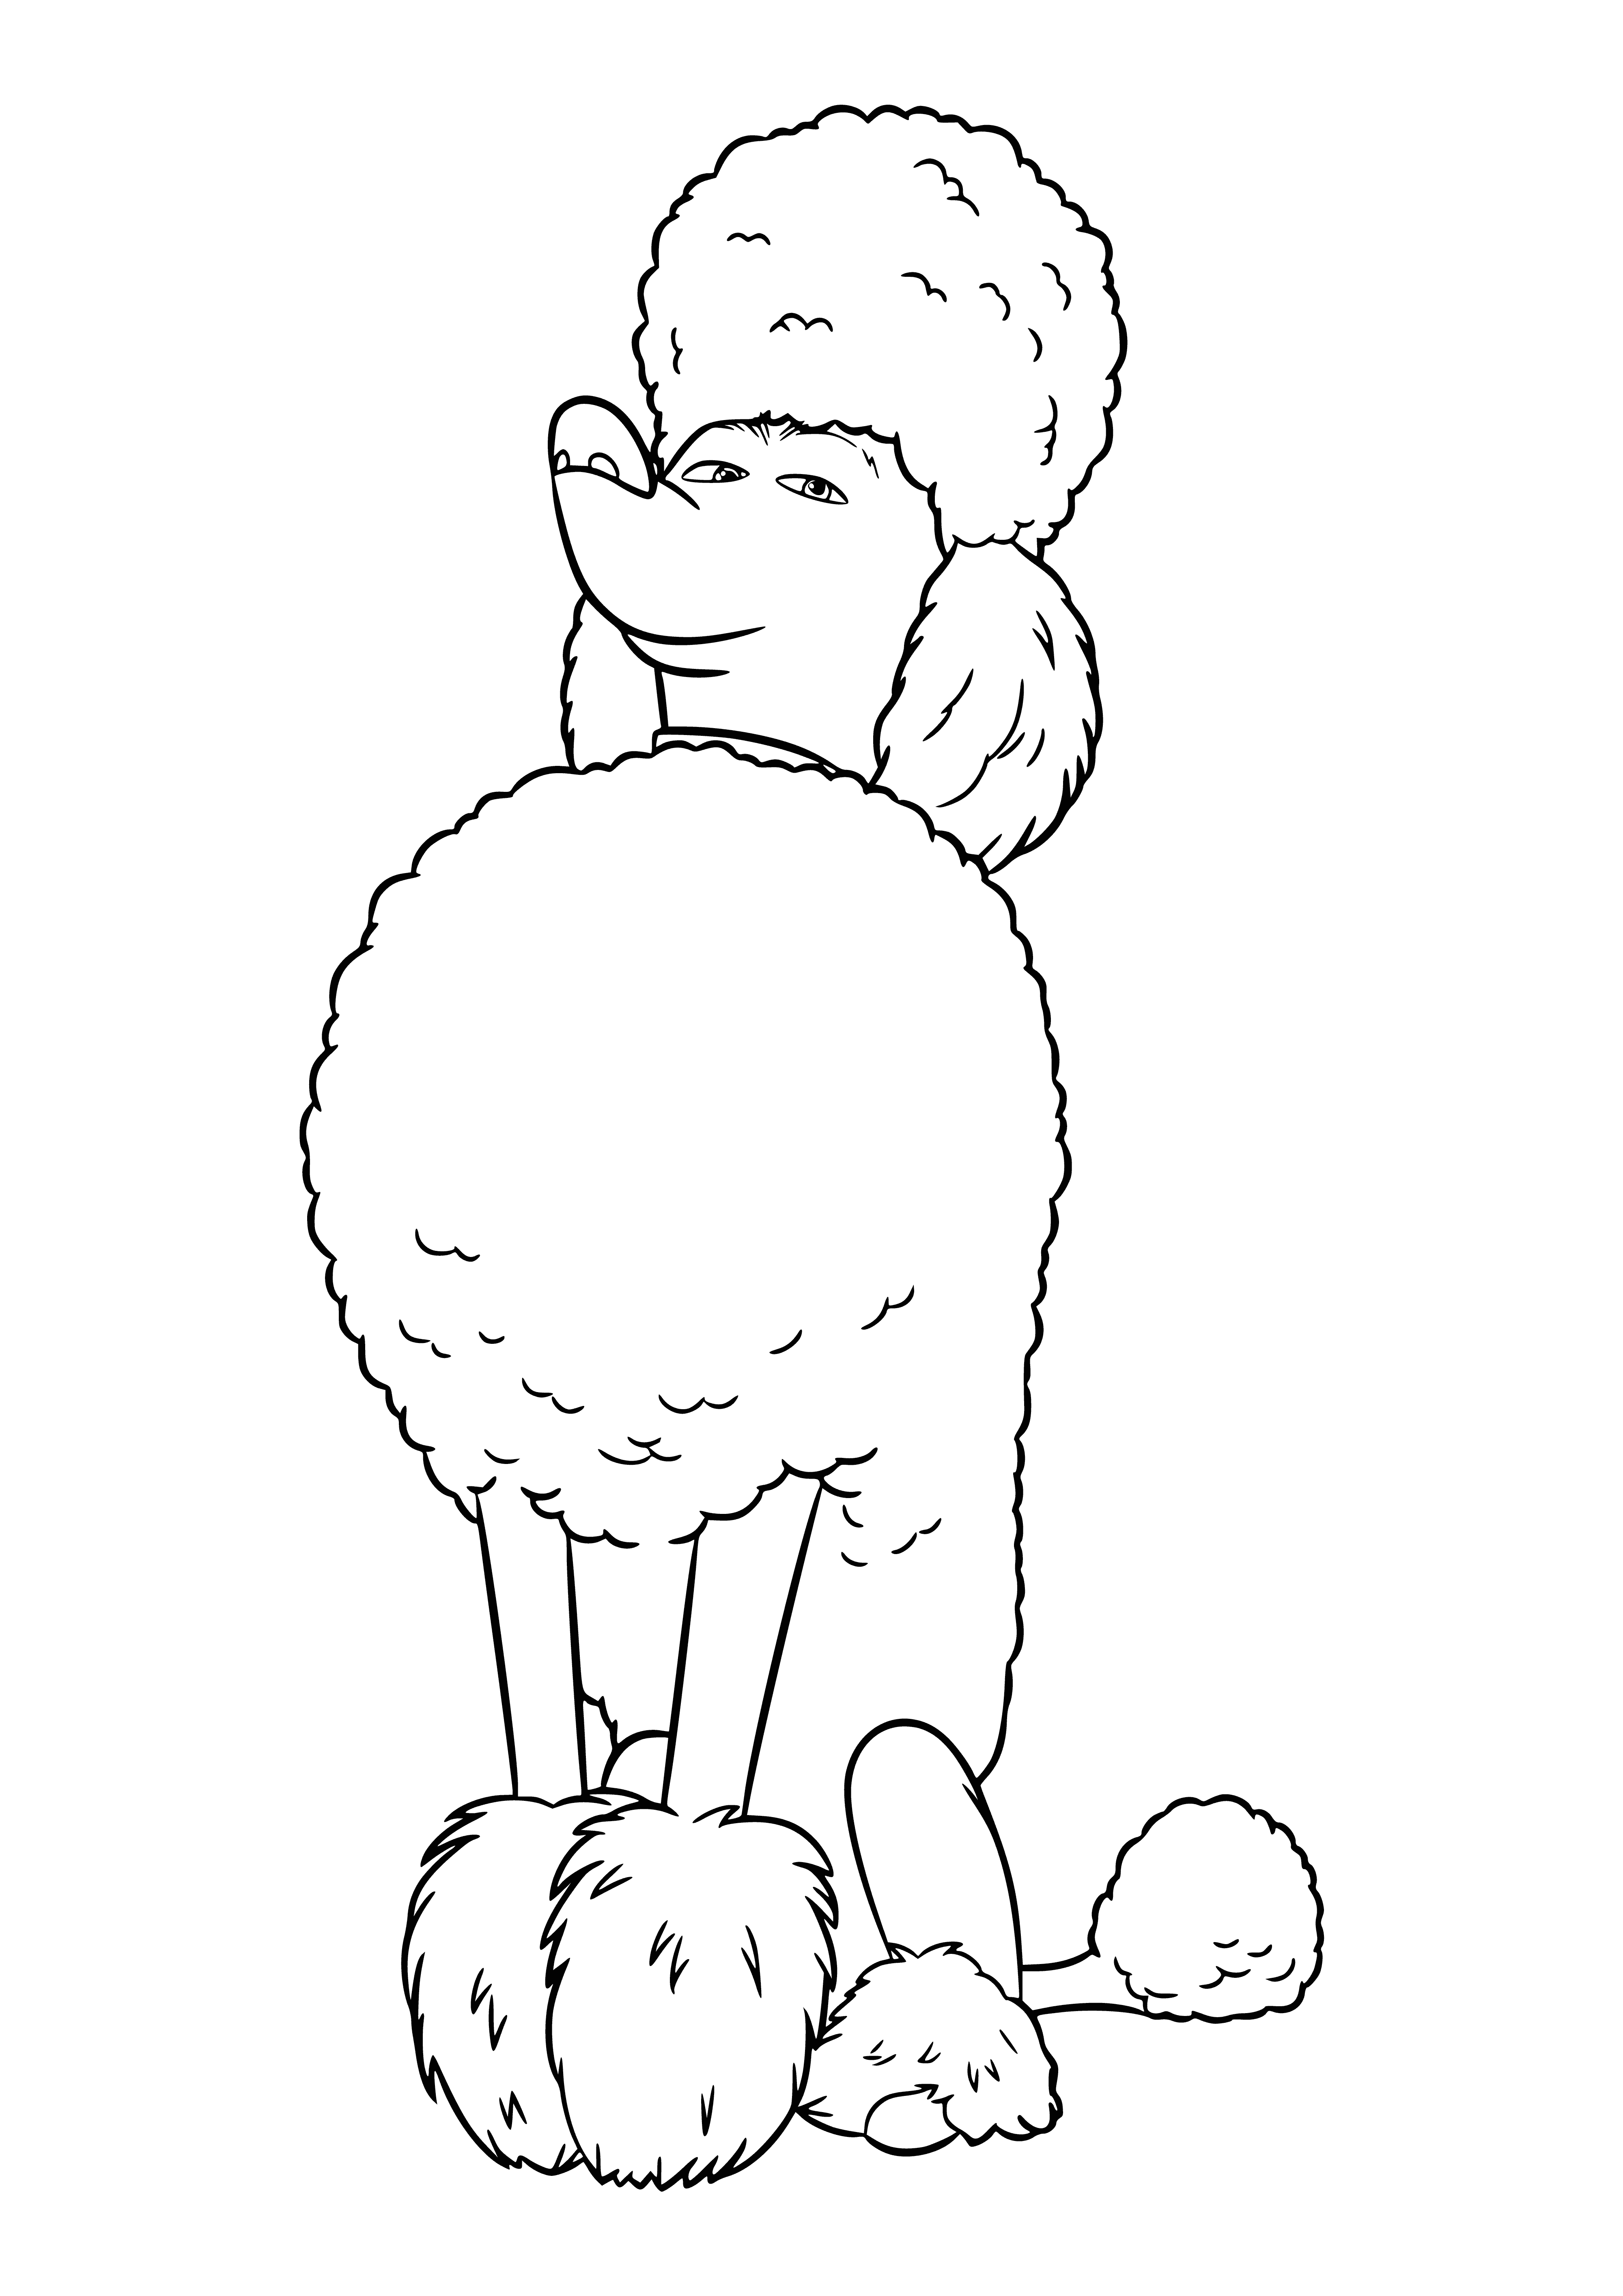 coloring page: Leonard the poodle is up to something sneaky, hiding something from his owner. He has a guilty look and is definitely up to no good!